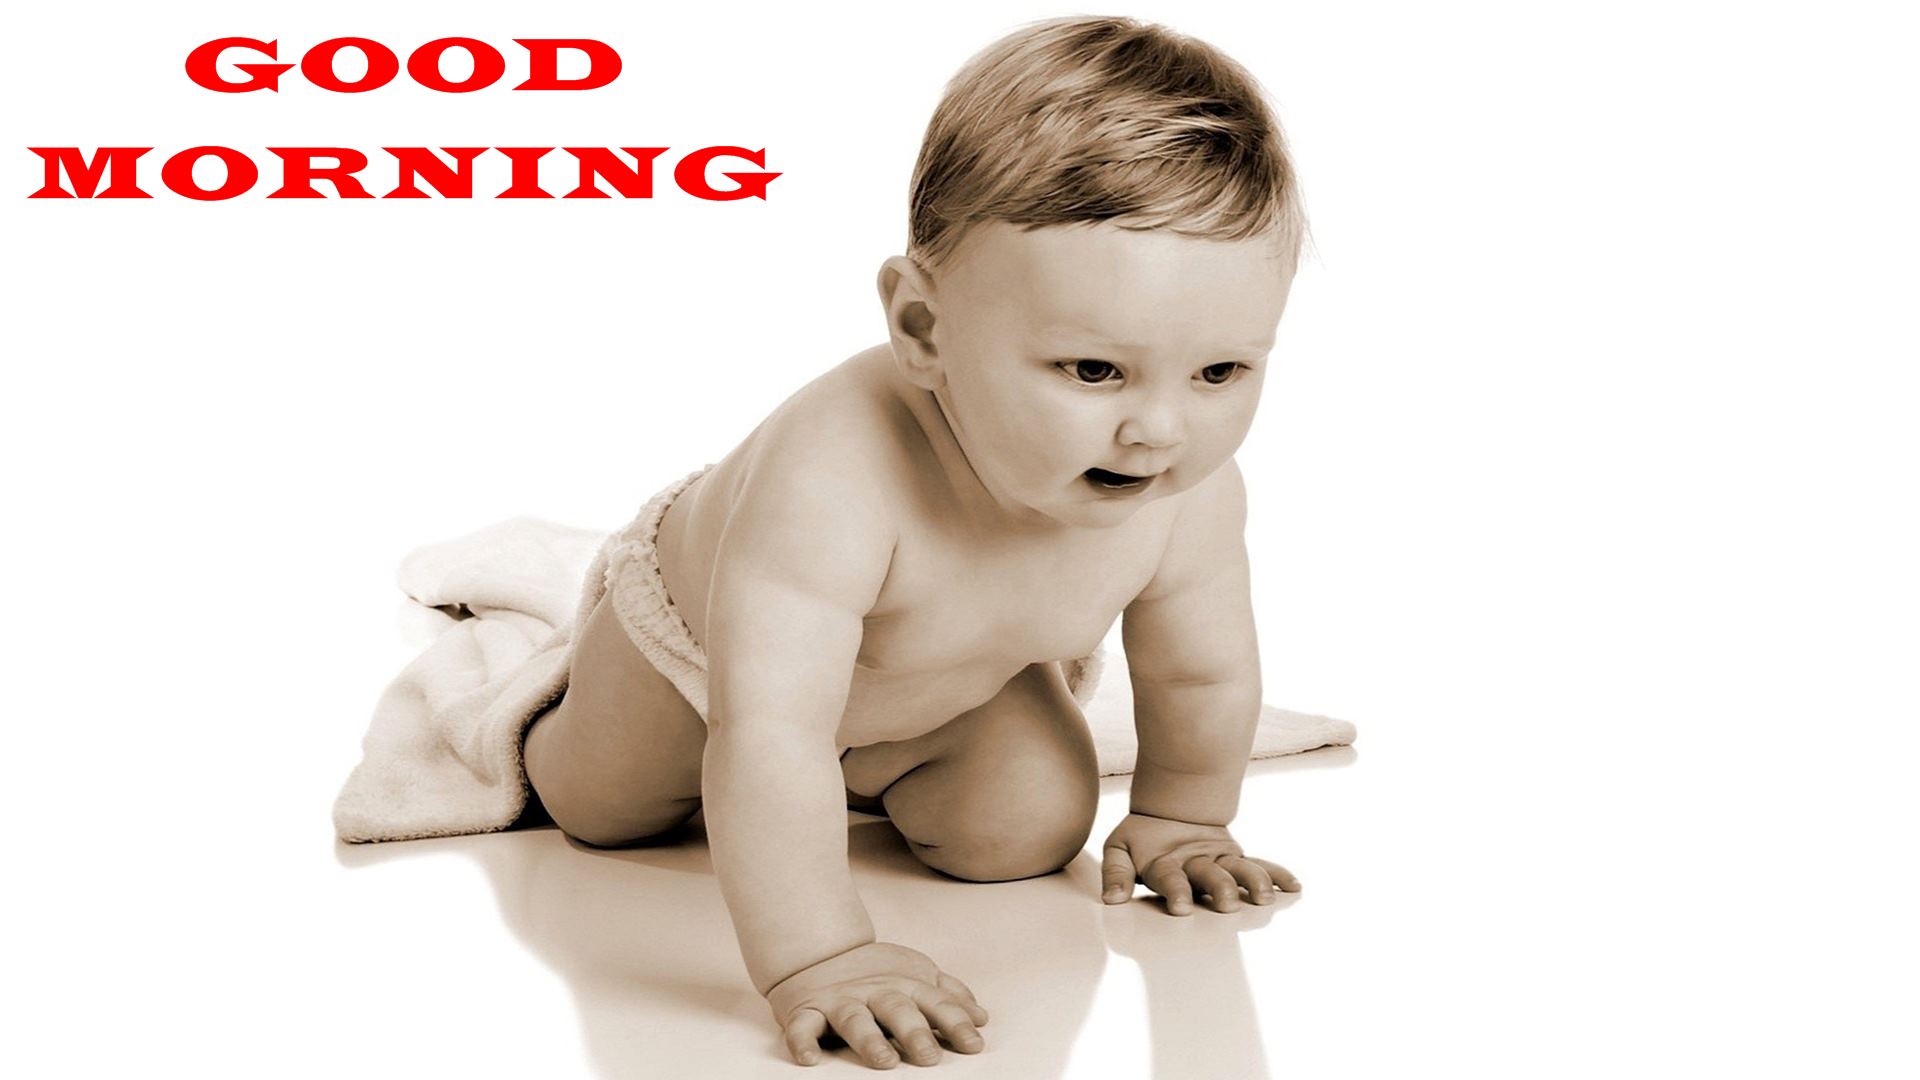 Good Morning Images With Little Boy - HD Wallpaper 